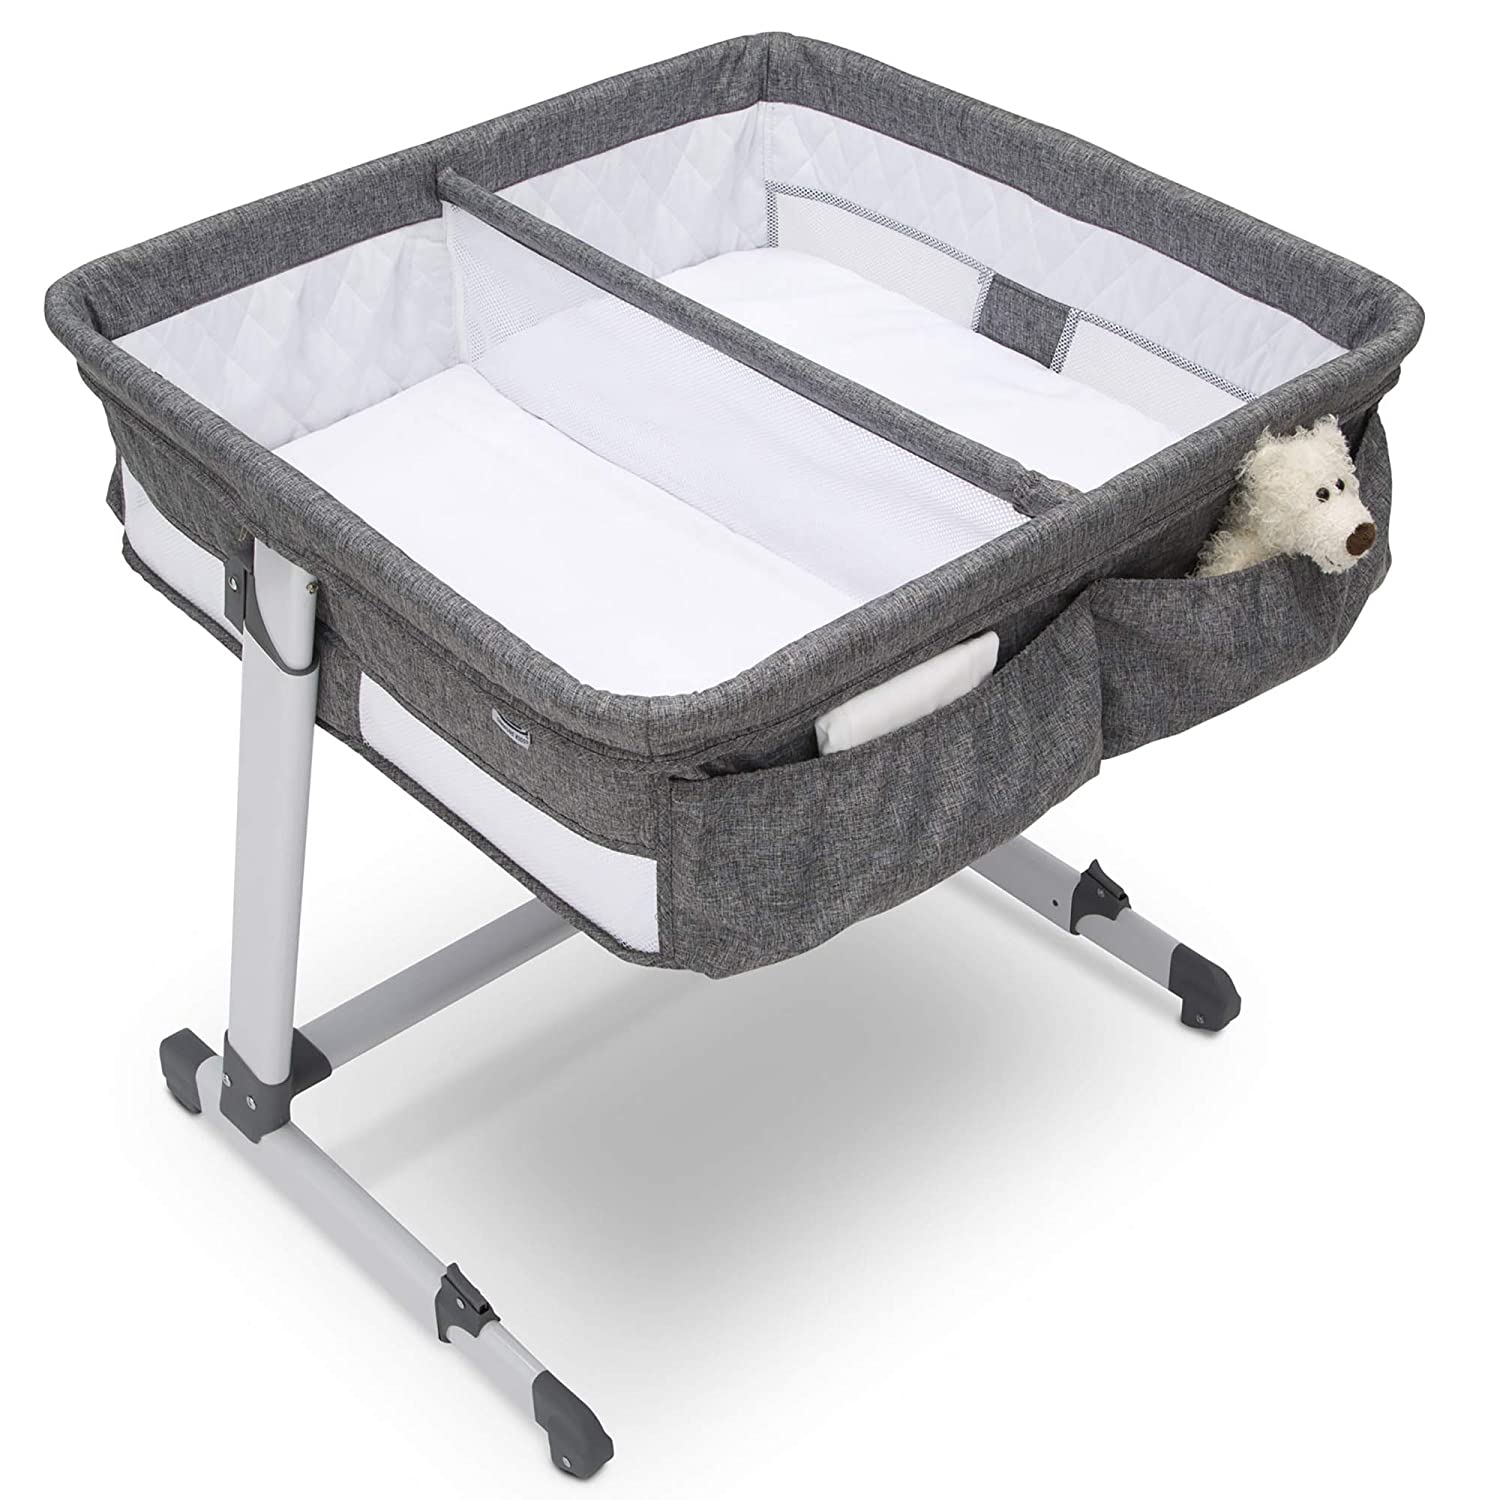 Simmons Kids By The Bed City Sleeper Bassinet for Twins - Adjustable Height Portable Crib with Wheels & Airflow Mesh, Grey Tweed